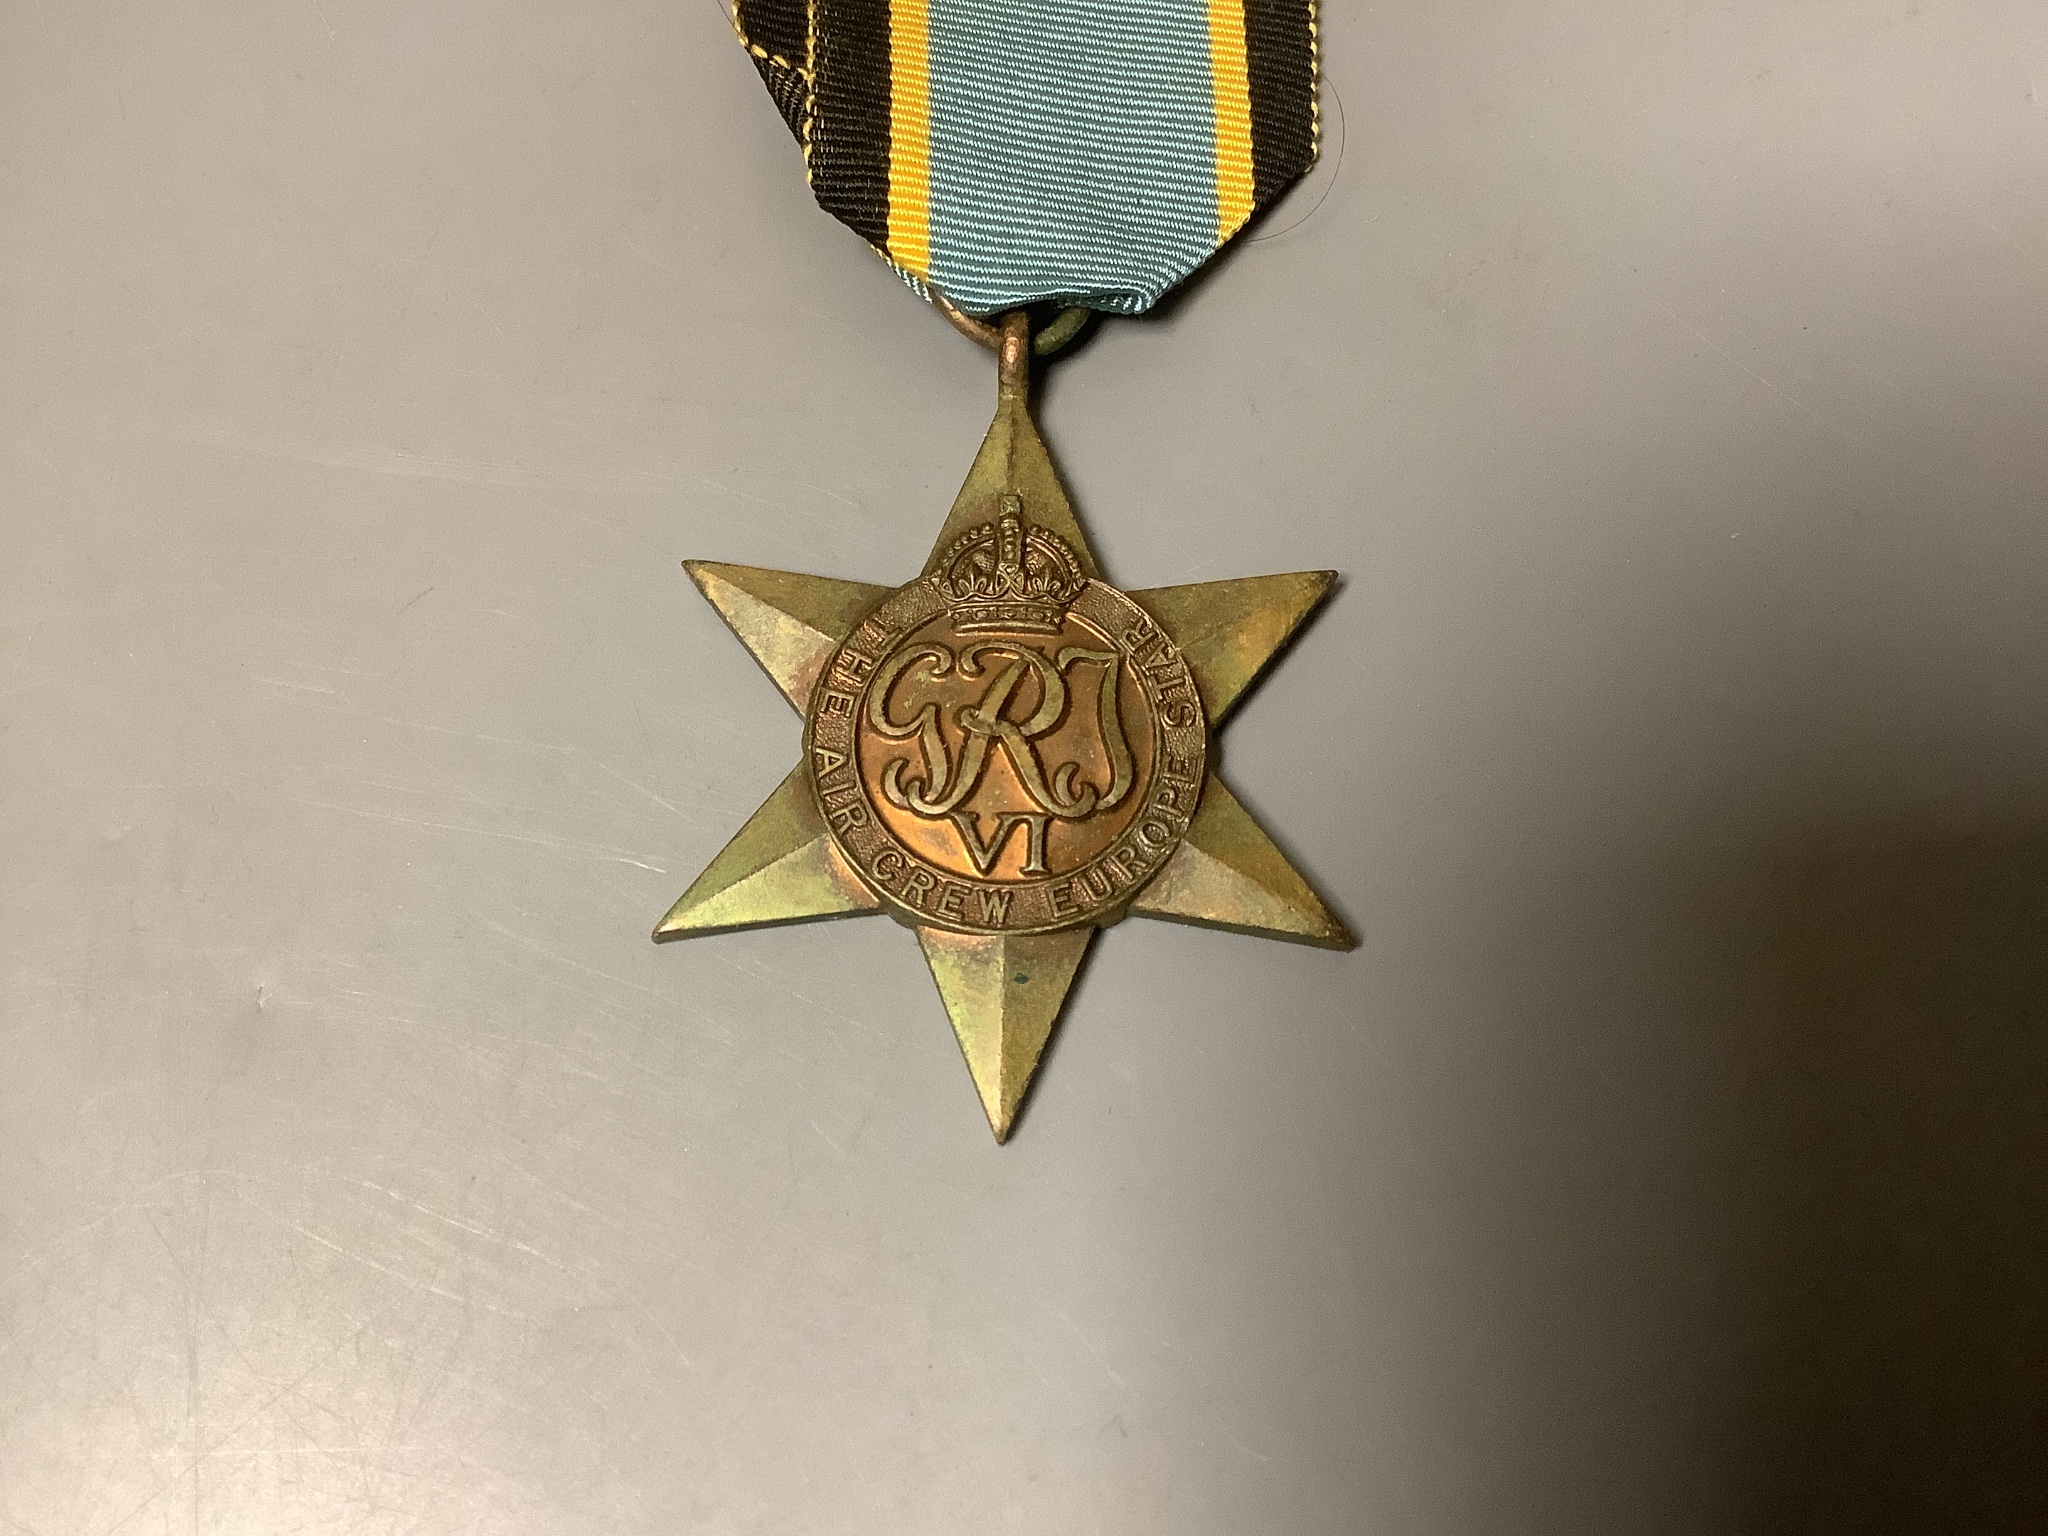 Fifteen unnamed WW2 medals to include Aircrew Europe star, 1939-1945 star (two), the Africa star, - Image 2 of 15